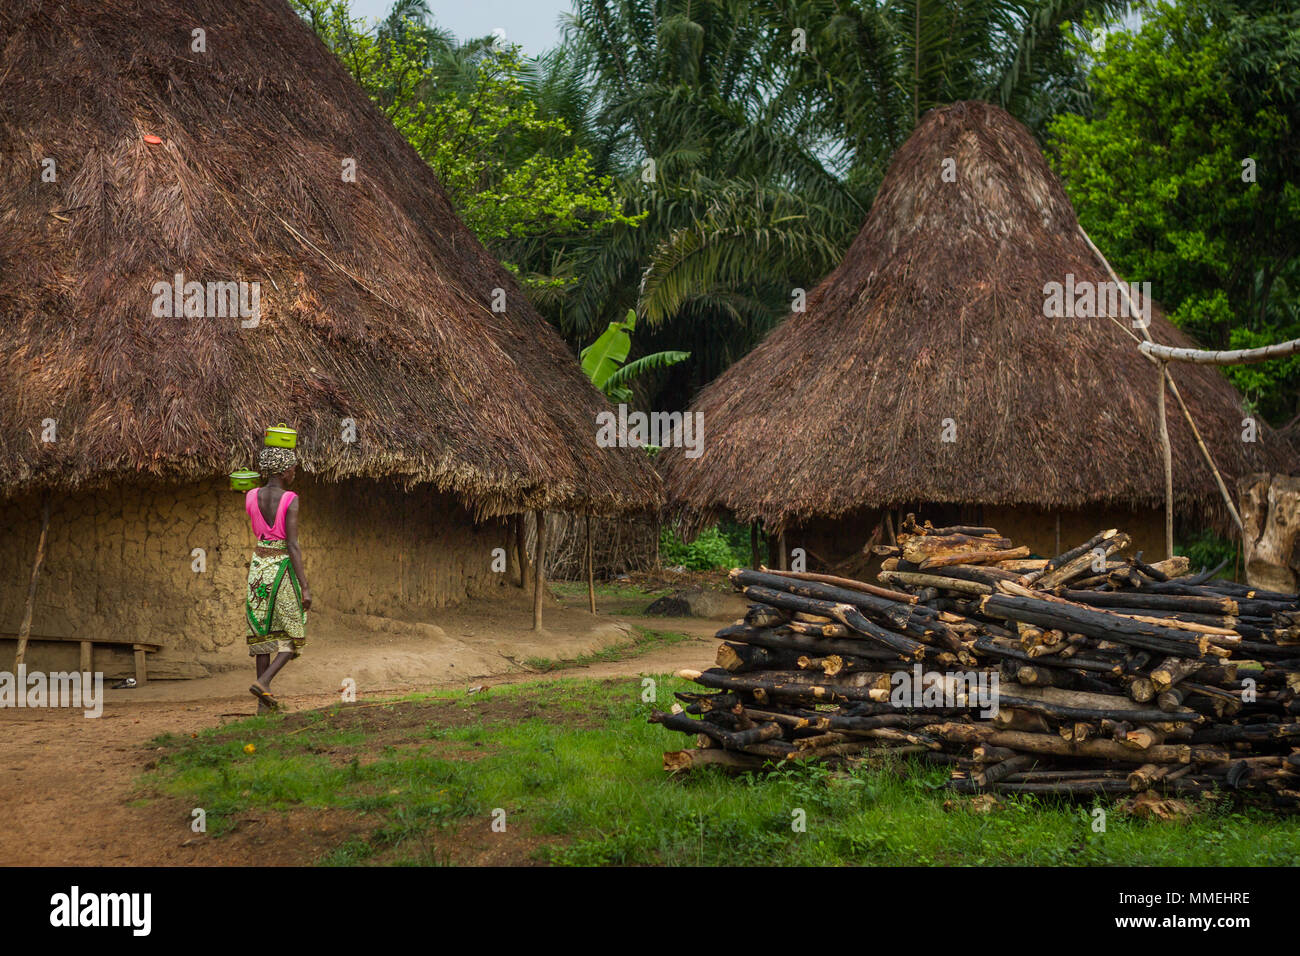 YONGORO, SIERRA LEONE - June 06, 2013: West Africa, unknown woman carries a pot on the head next to the village huts near the capital Freetown, Sierra Stock Photo